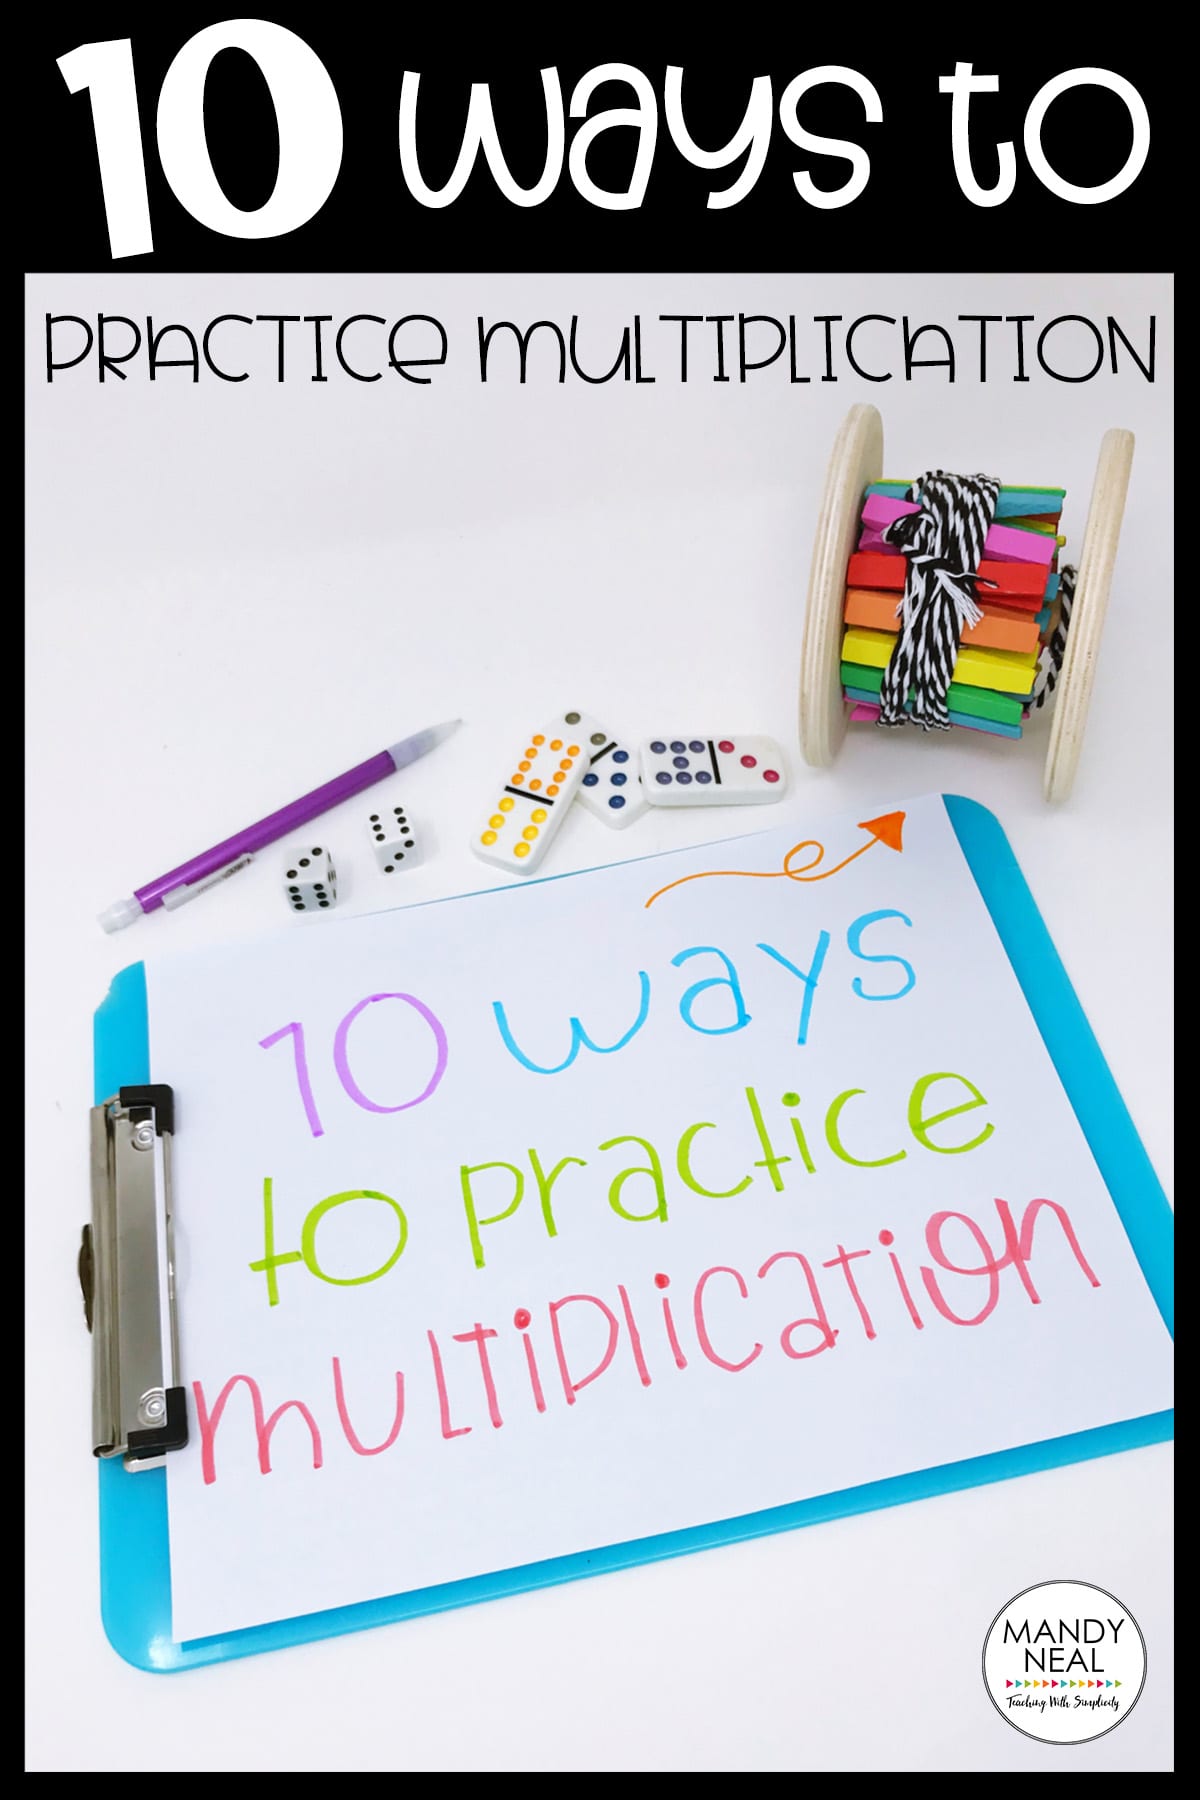 10-ways-to-practice-multiplication-facts-mandy-neal